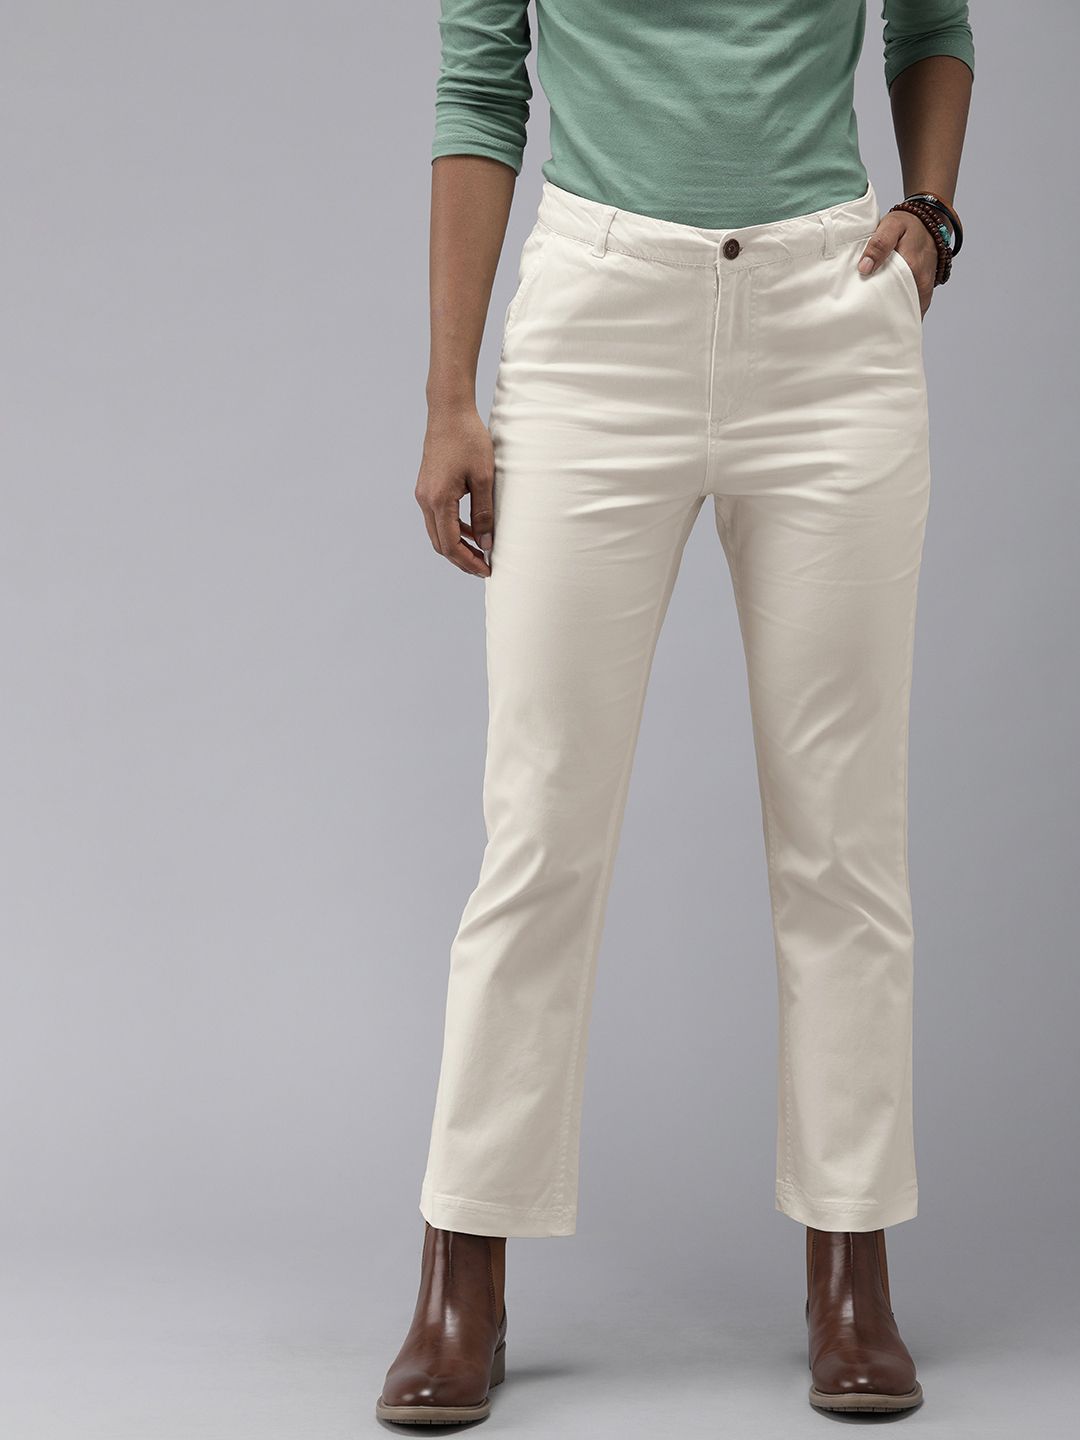 Roadster Women Off White Slim Fit Cropped Regular Trousers Price in India